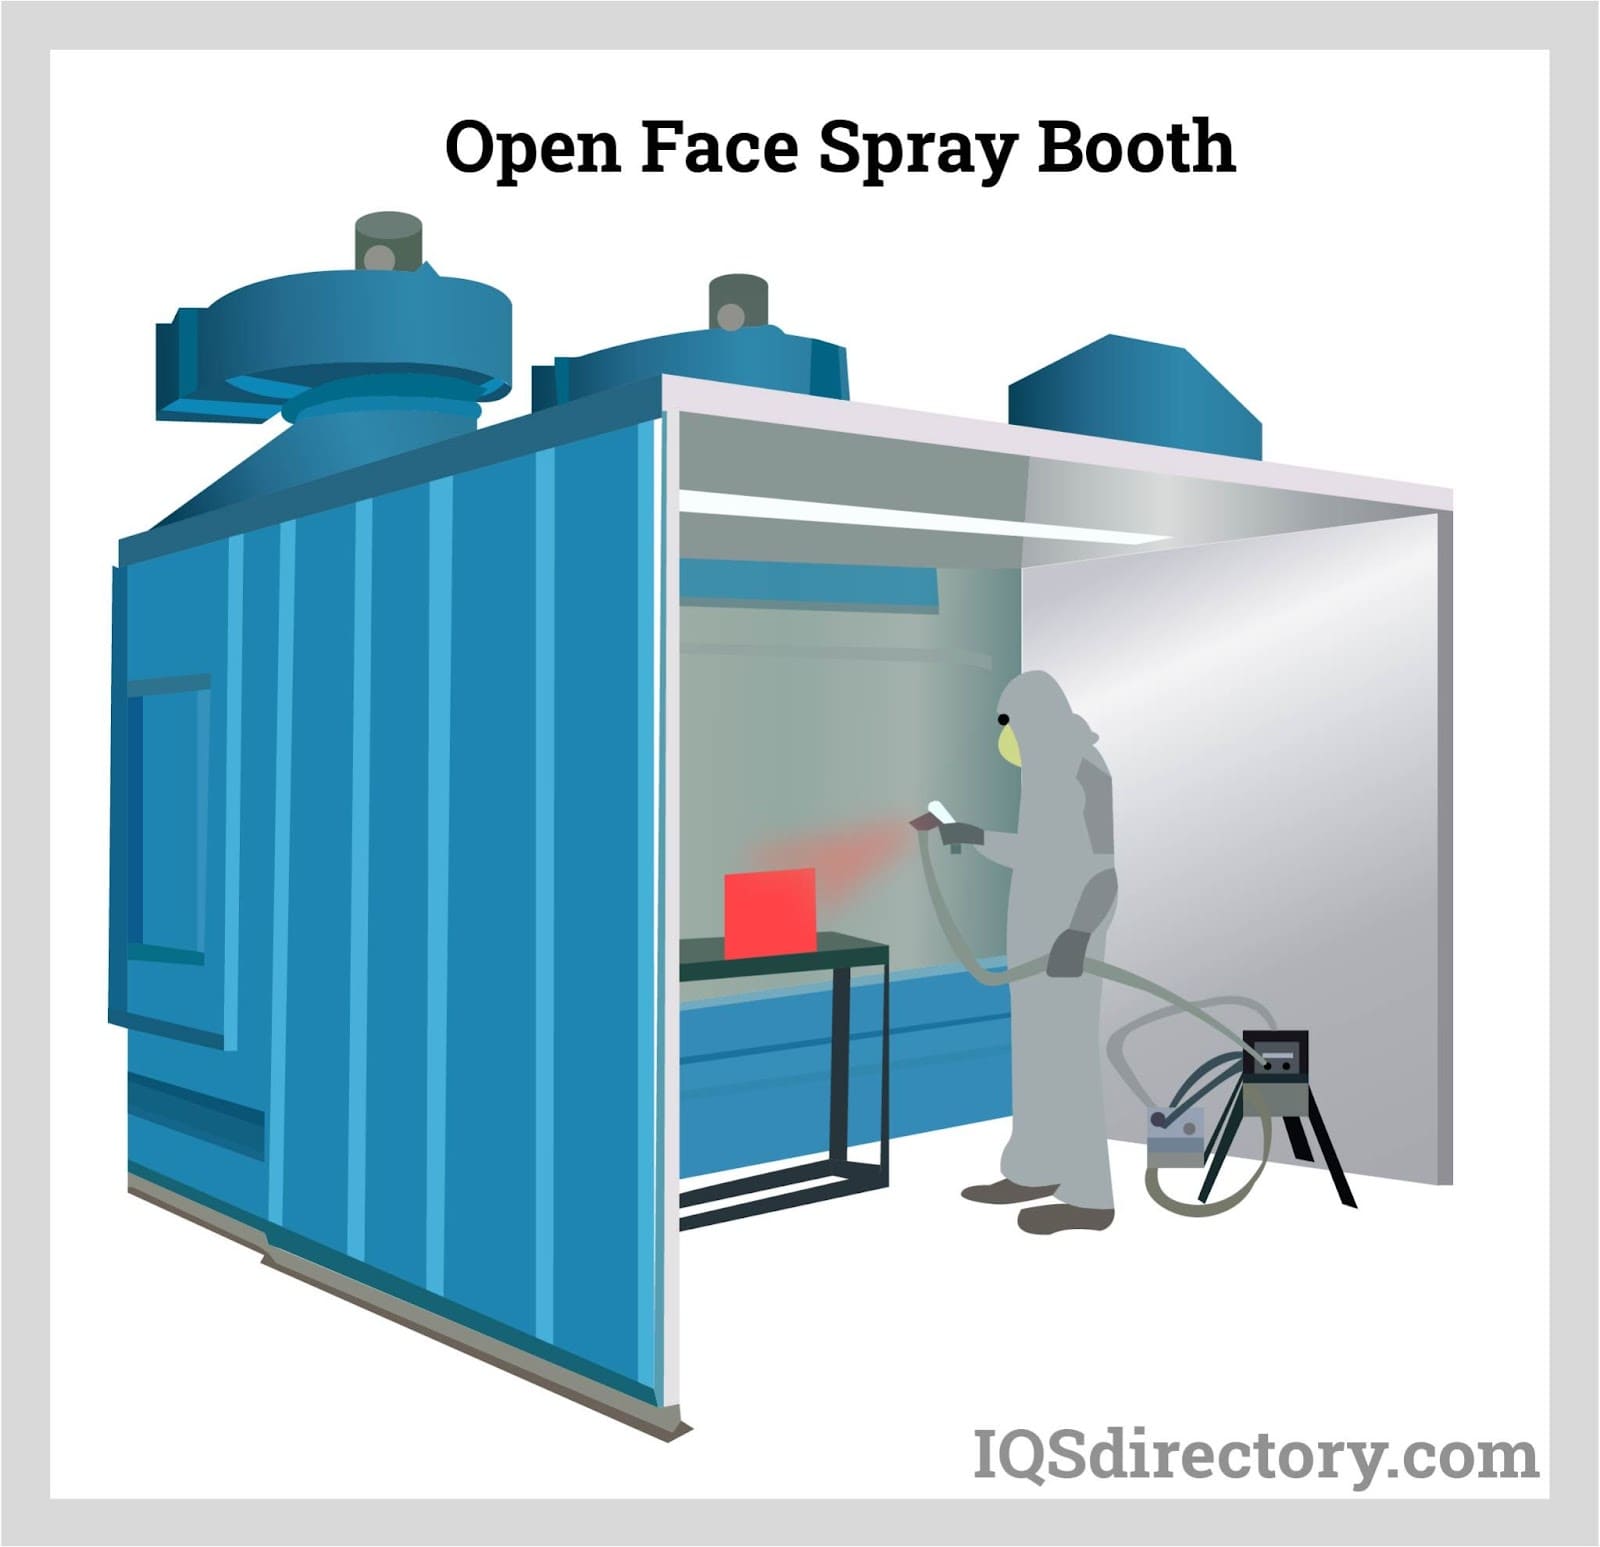 Build an Easy and Cheap Tabletop Spray Booth - Make